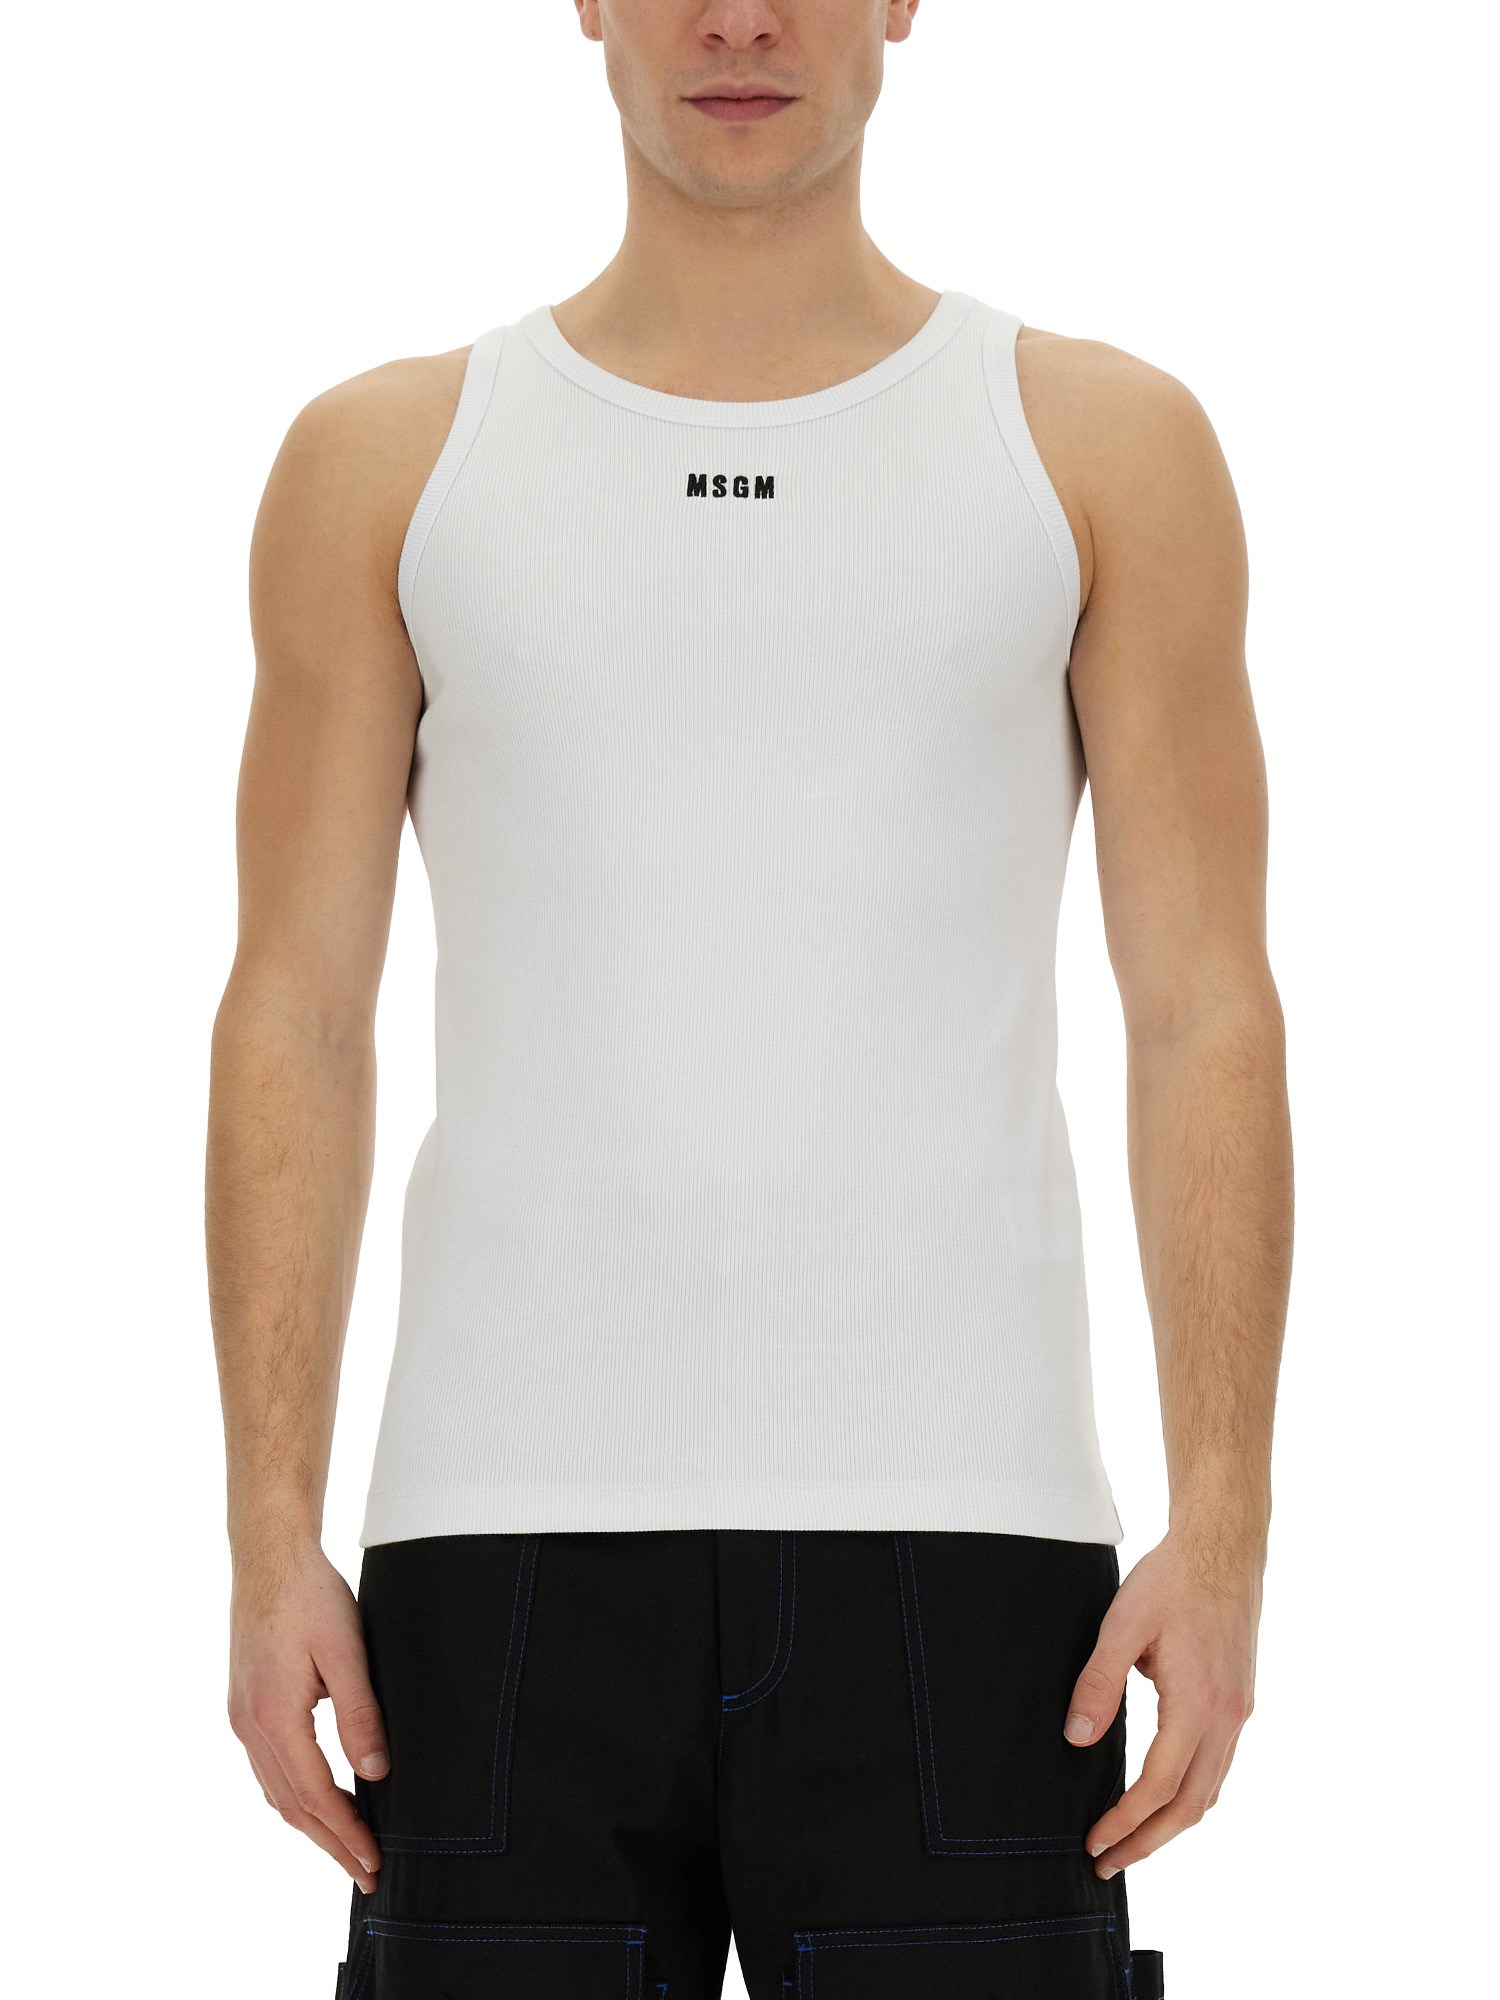 msgm tank top with logo